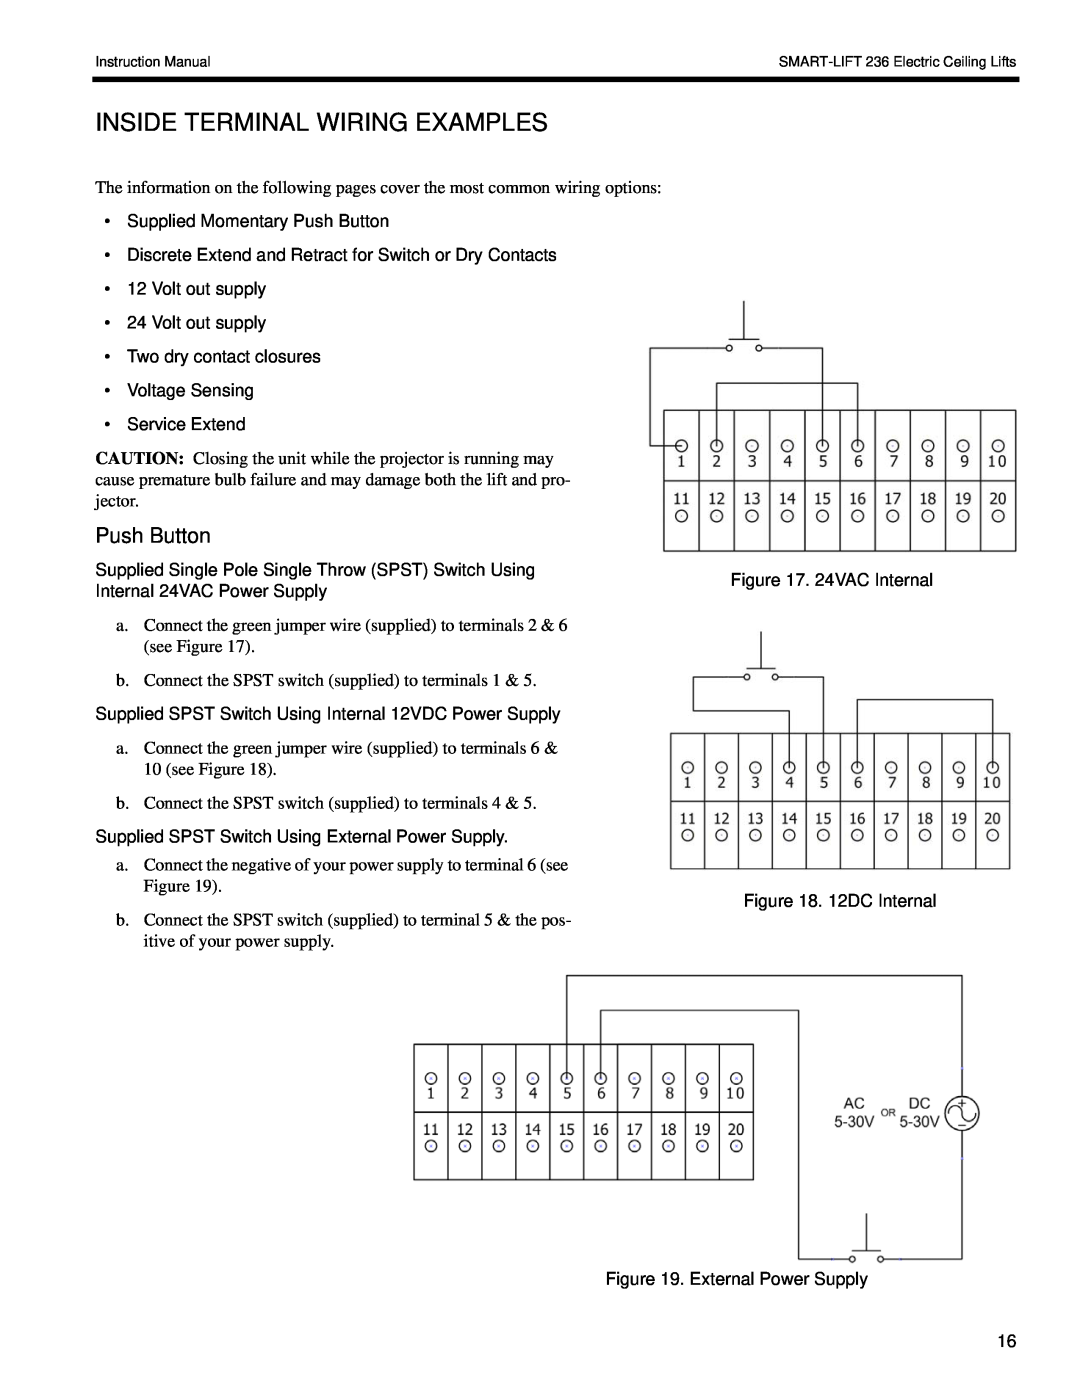 Chief Manufacturing SL-236 installation instructions Inside Terminal Wiring Examples, Push Button 